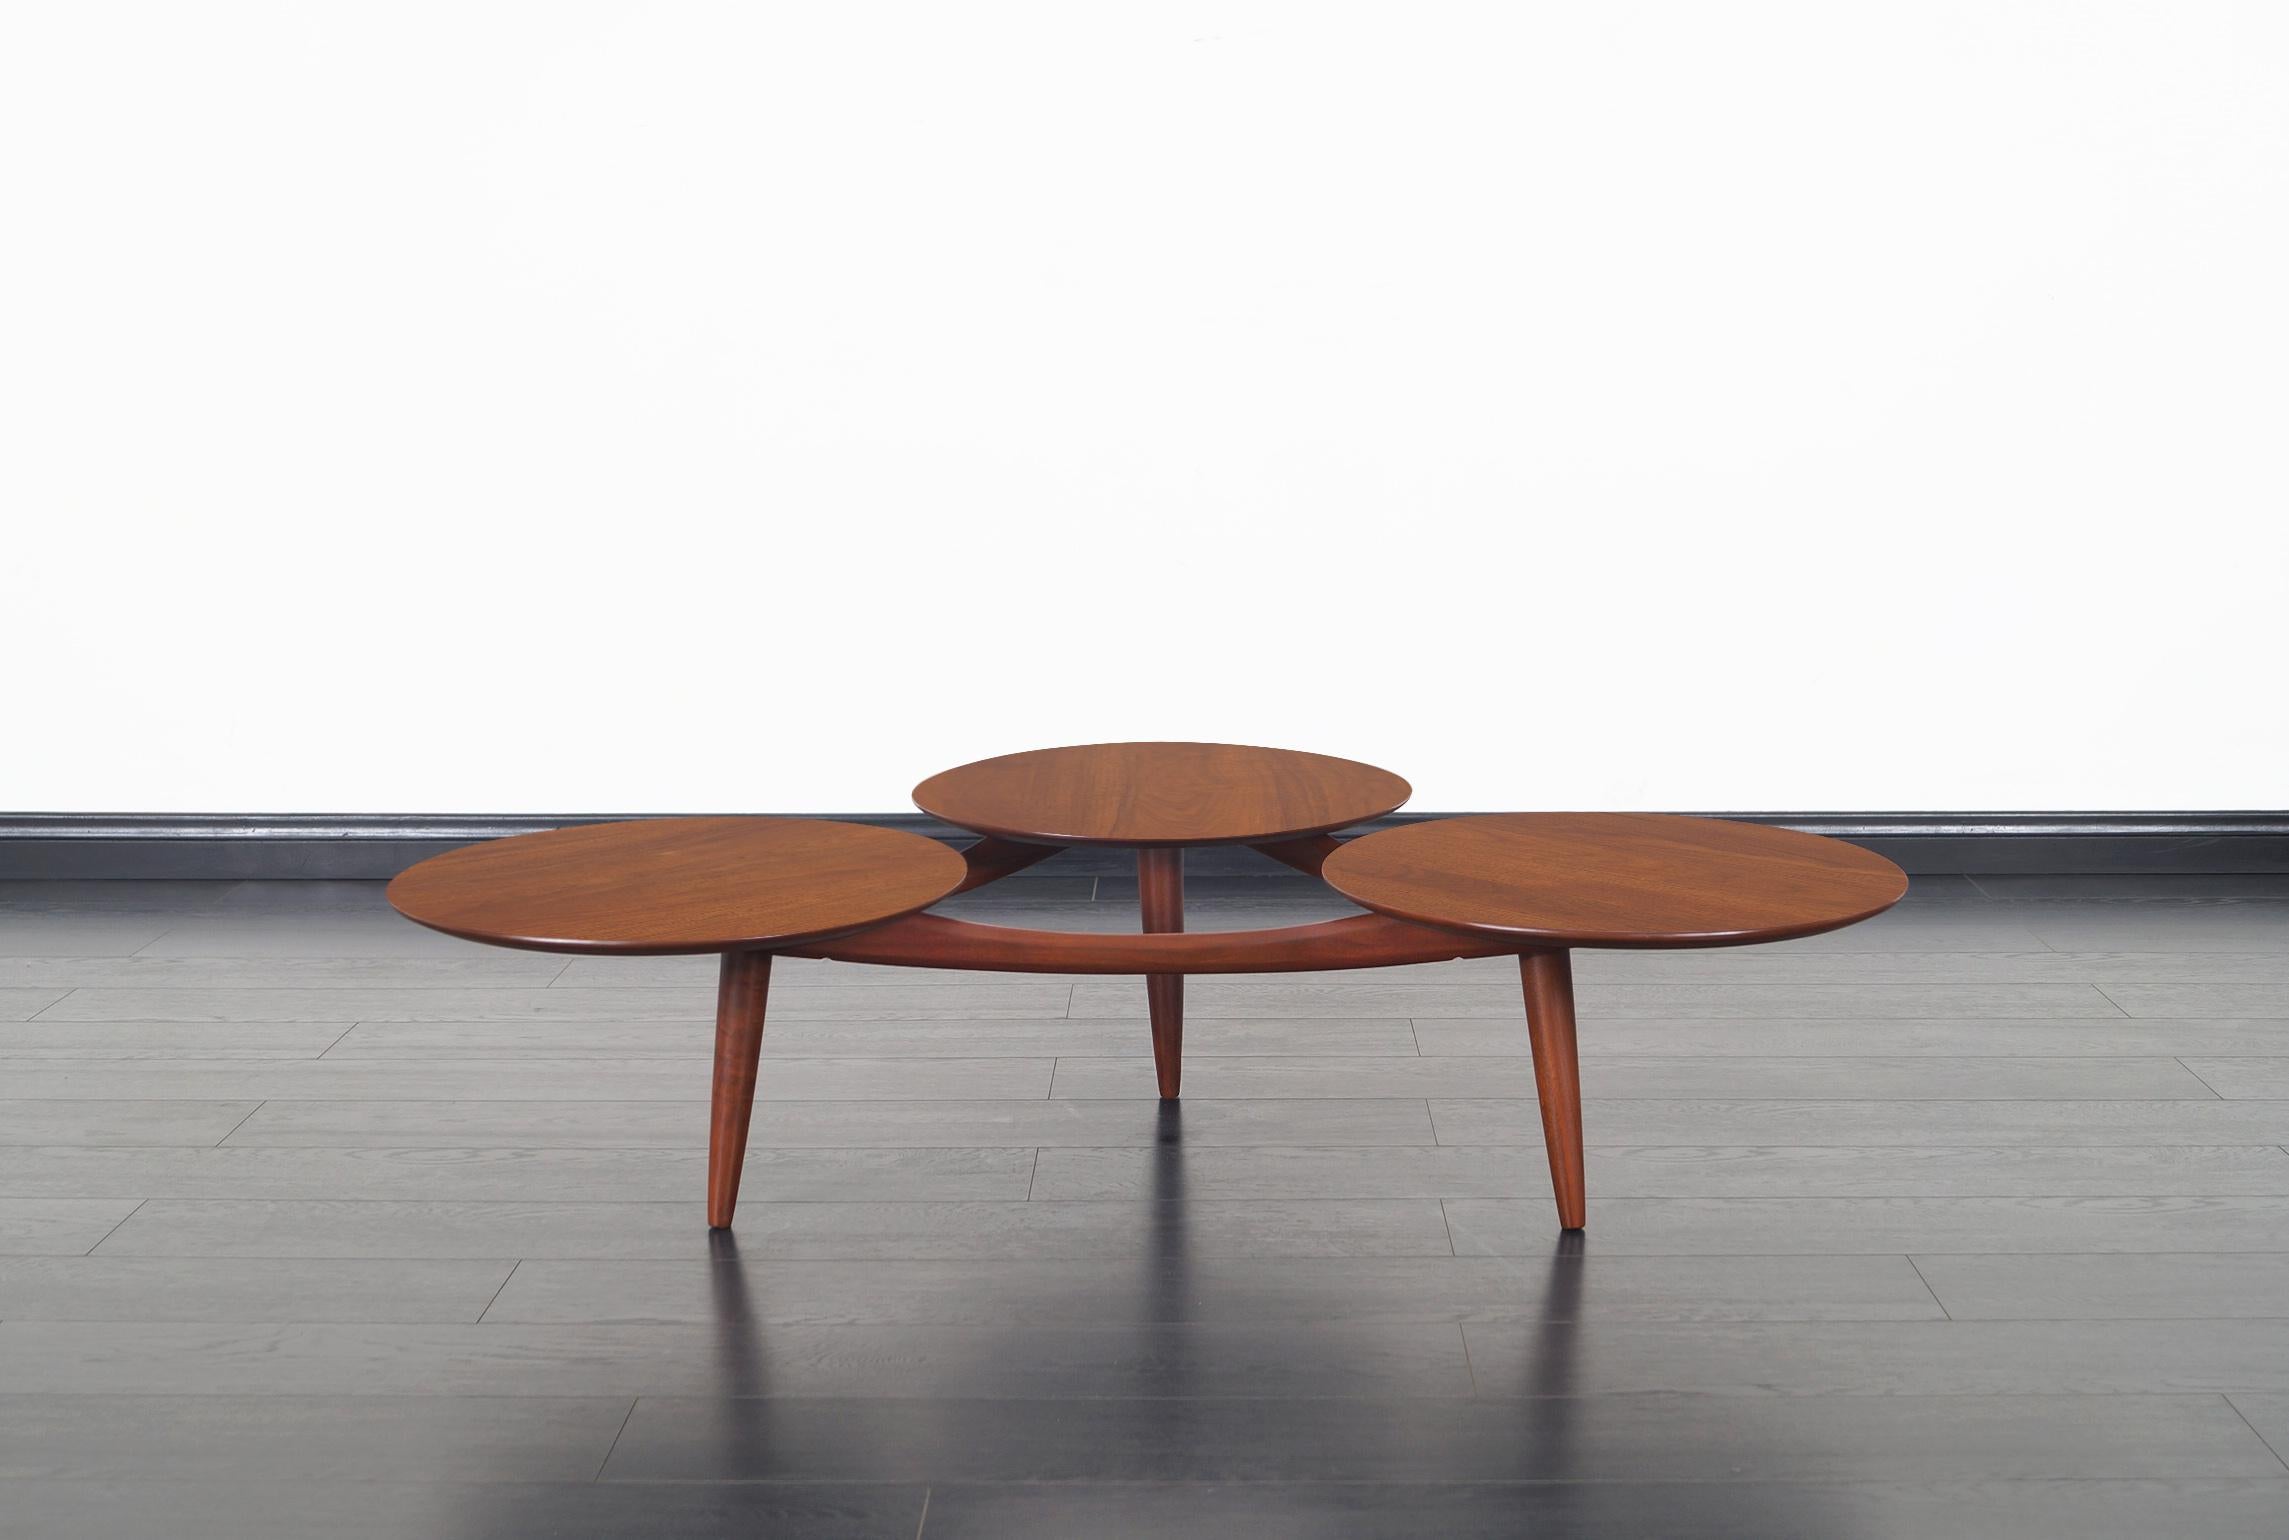 An amazing vintage solid walnut coffee table attributed to Greta Grossman. Features three circular floating tops on a solid walnut base. Manufacture by ACE-HI in Los Angeles, California for its Prelude collection.